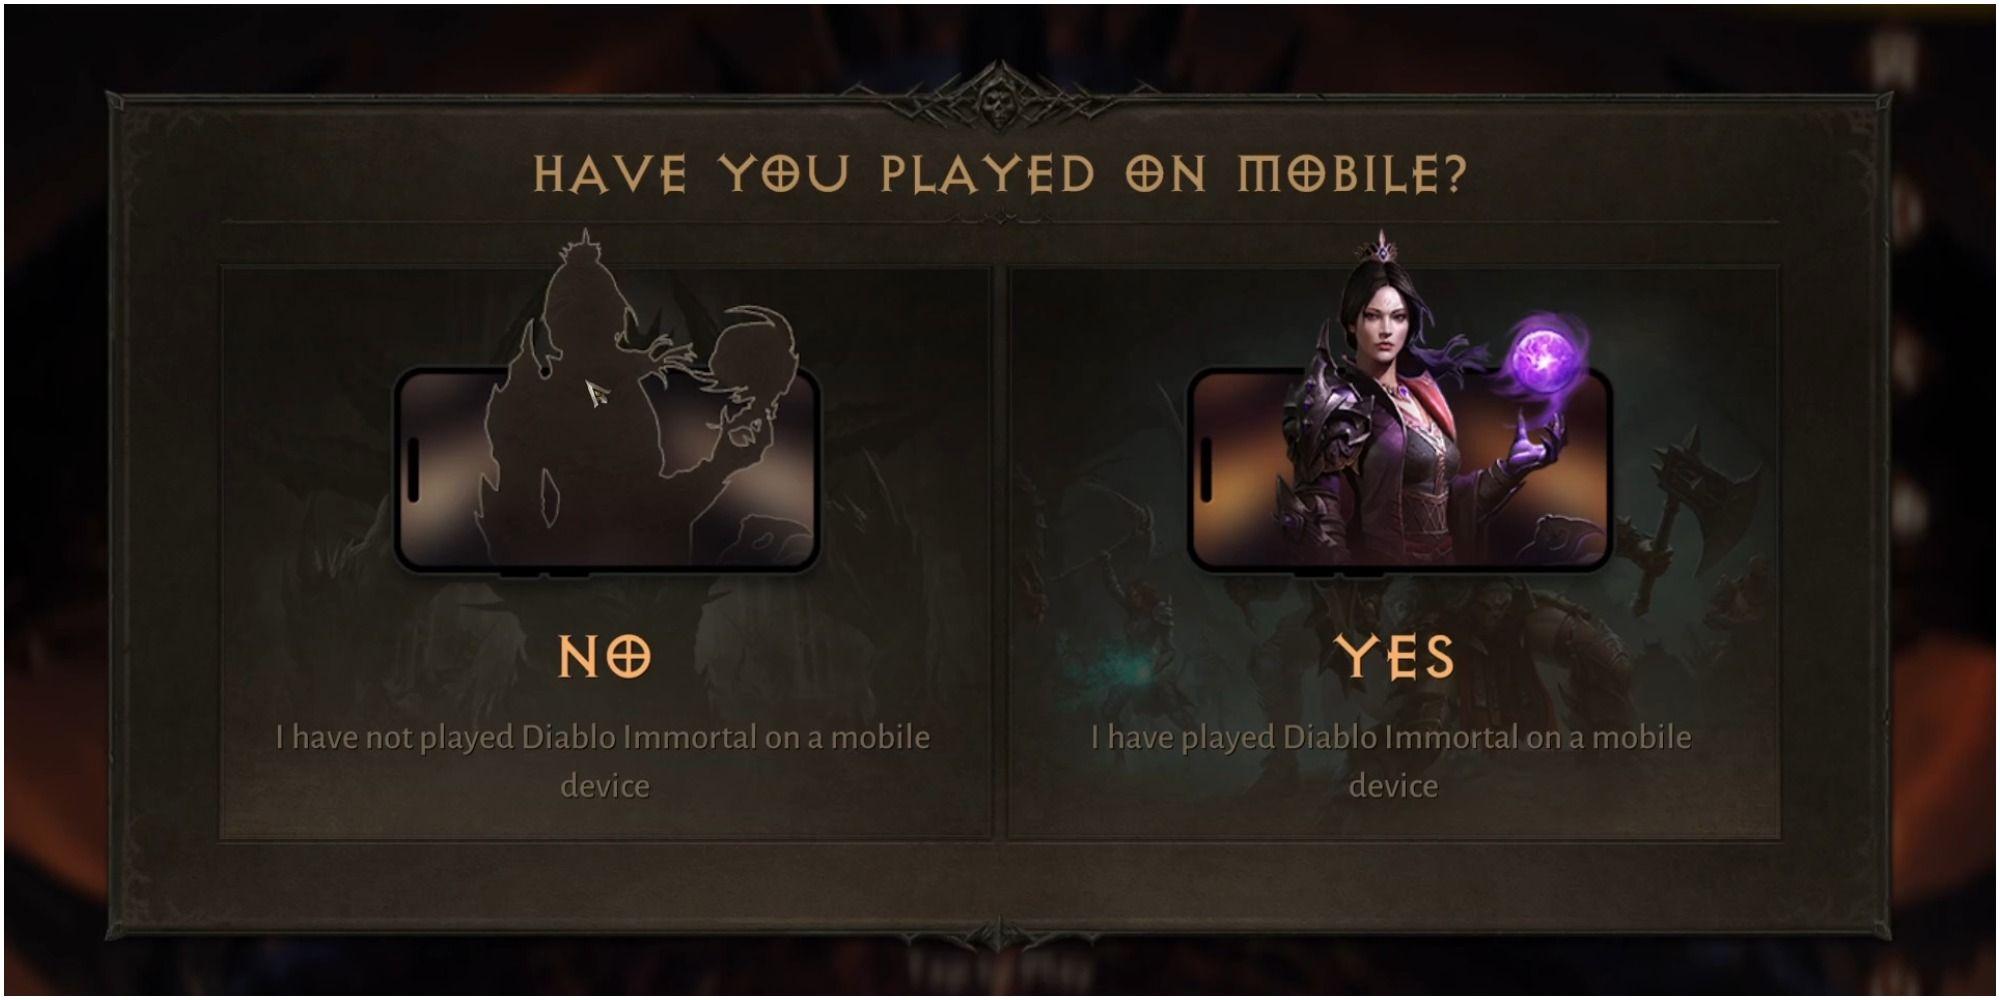 Diablo Immortal Answering If There Is An Existing Log In